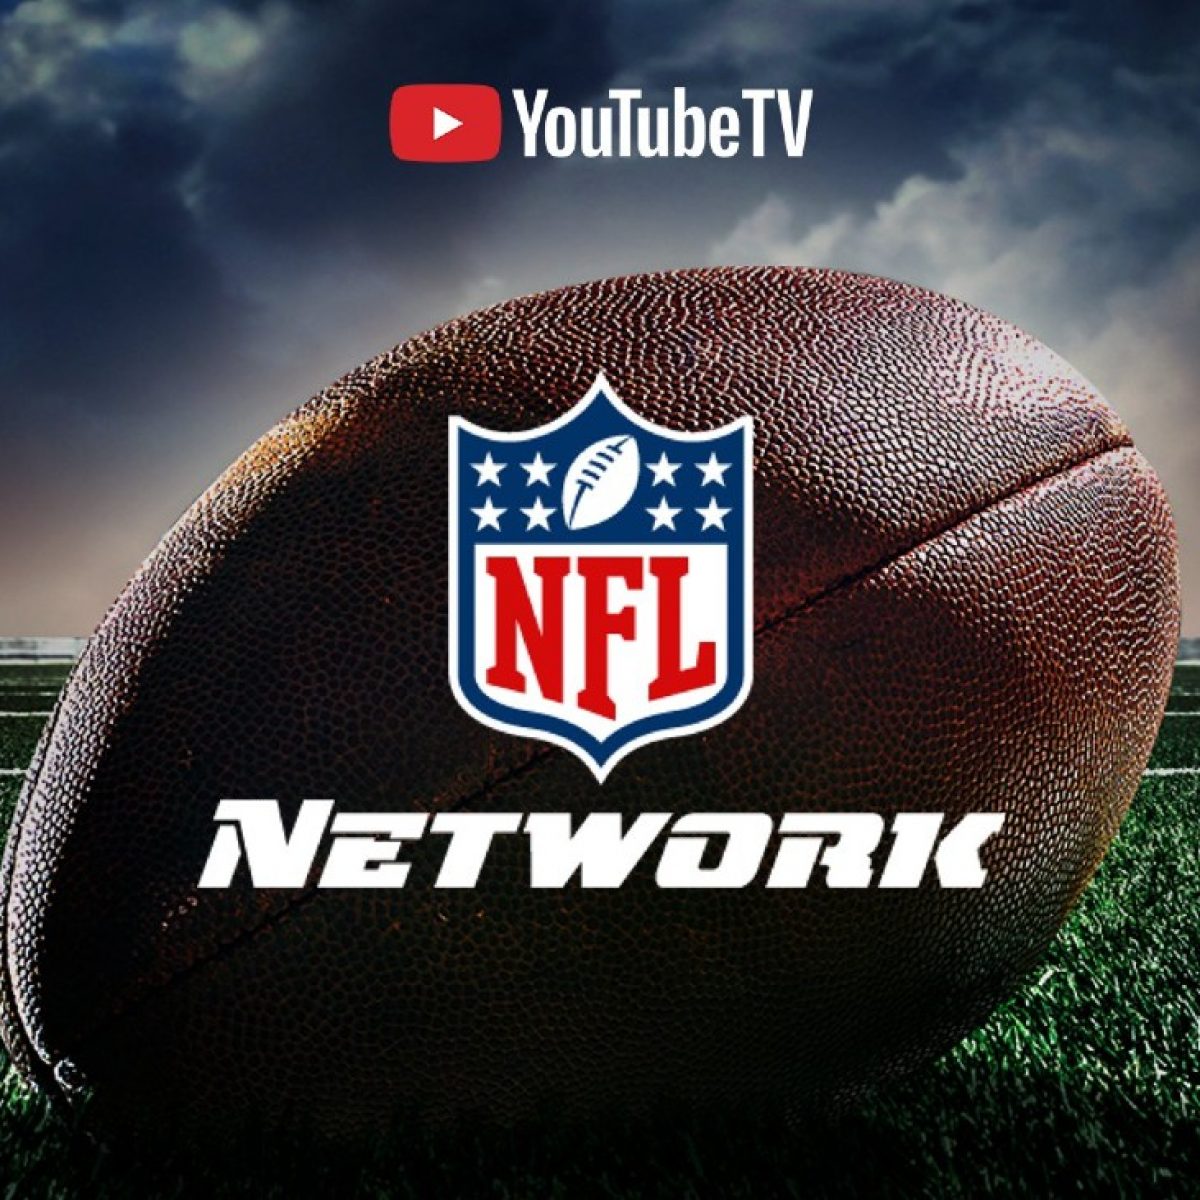 YouTube TV Adds a Ton of Football, Both American and the Other Kind